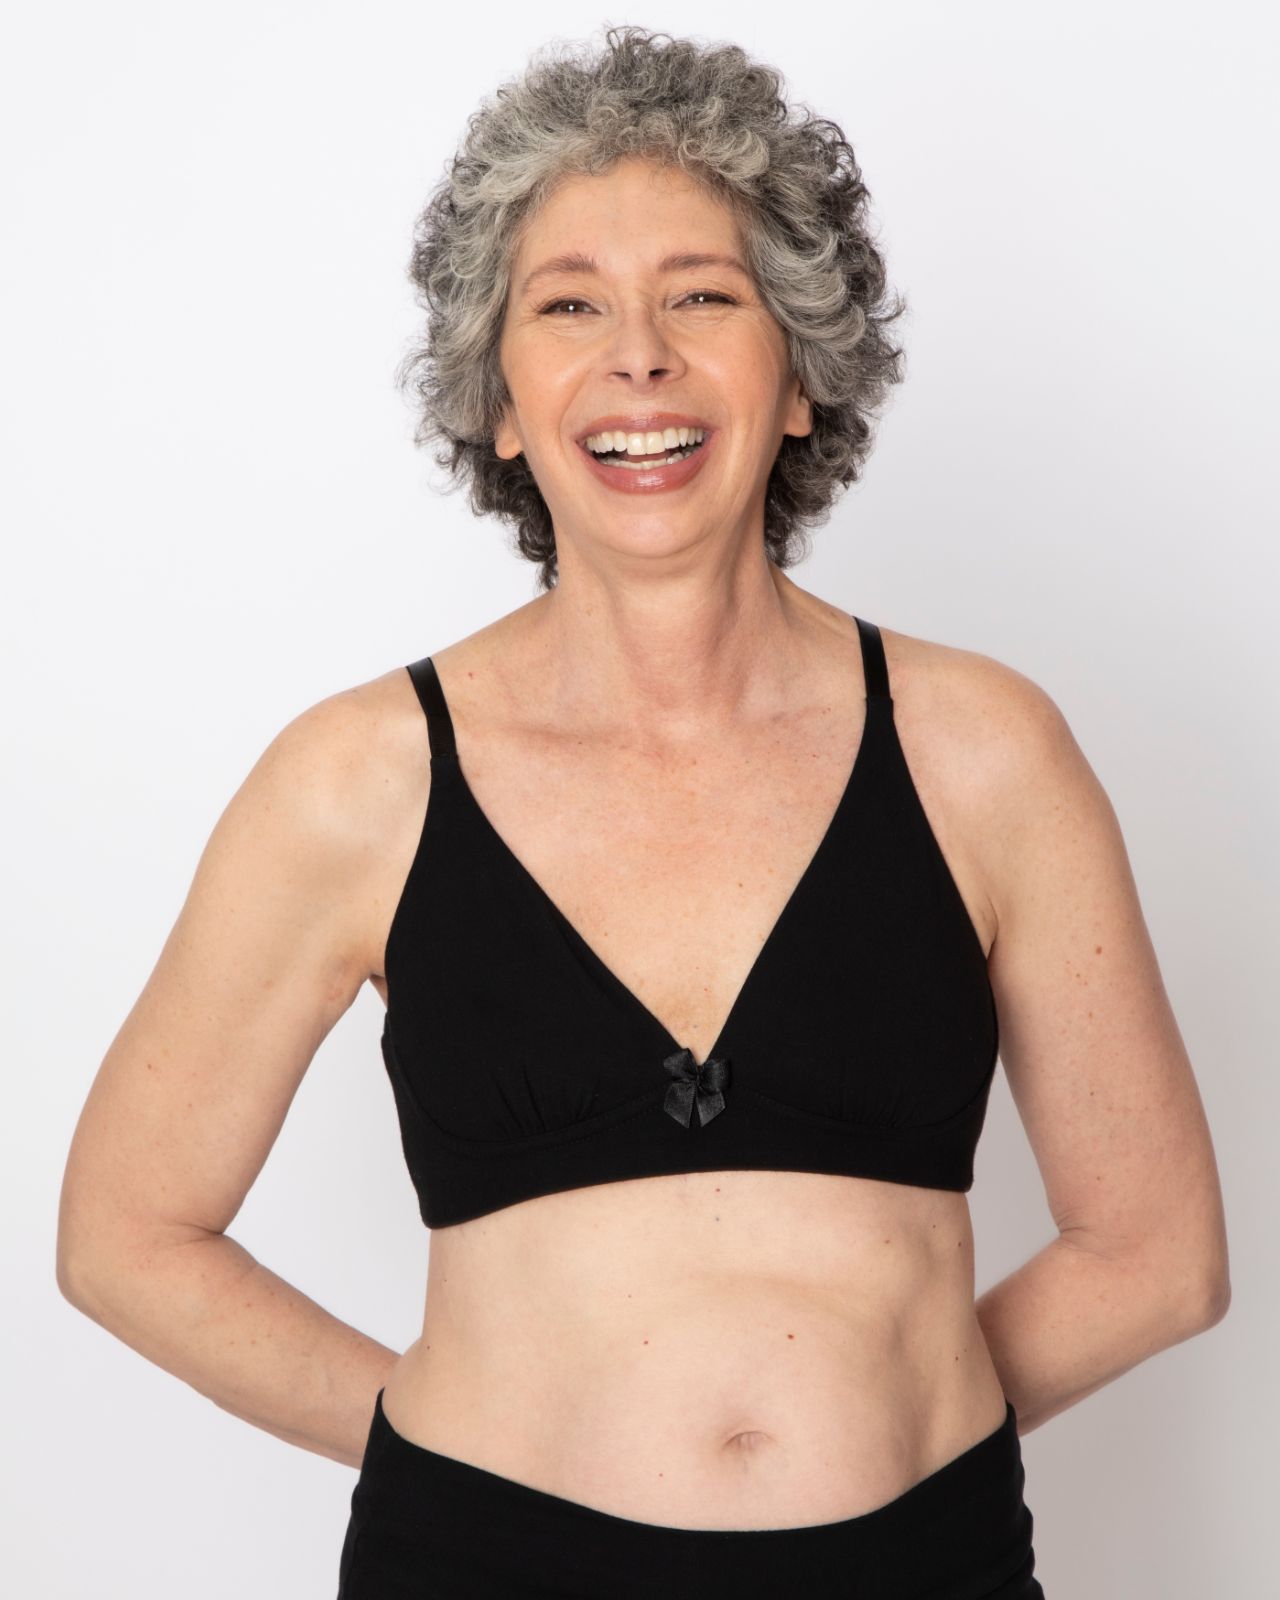 Older white woman smiling and wearing a black bra